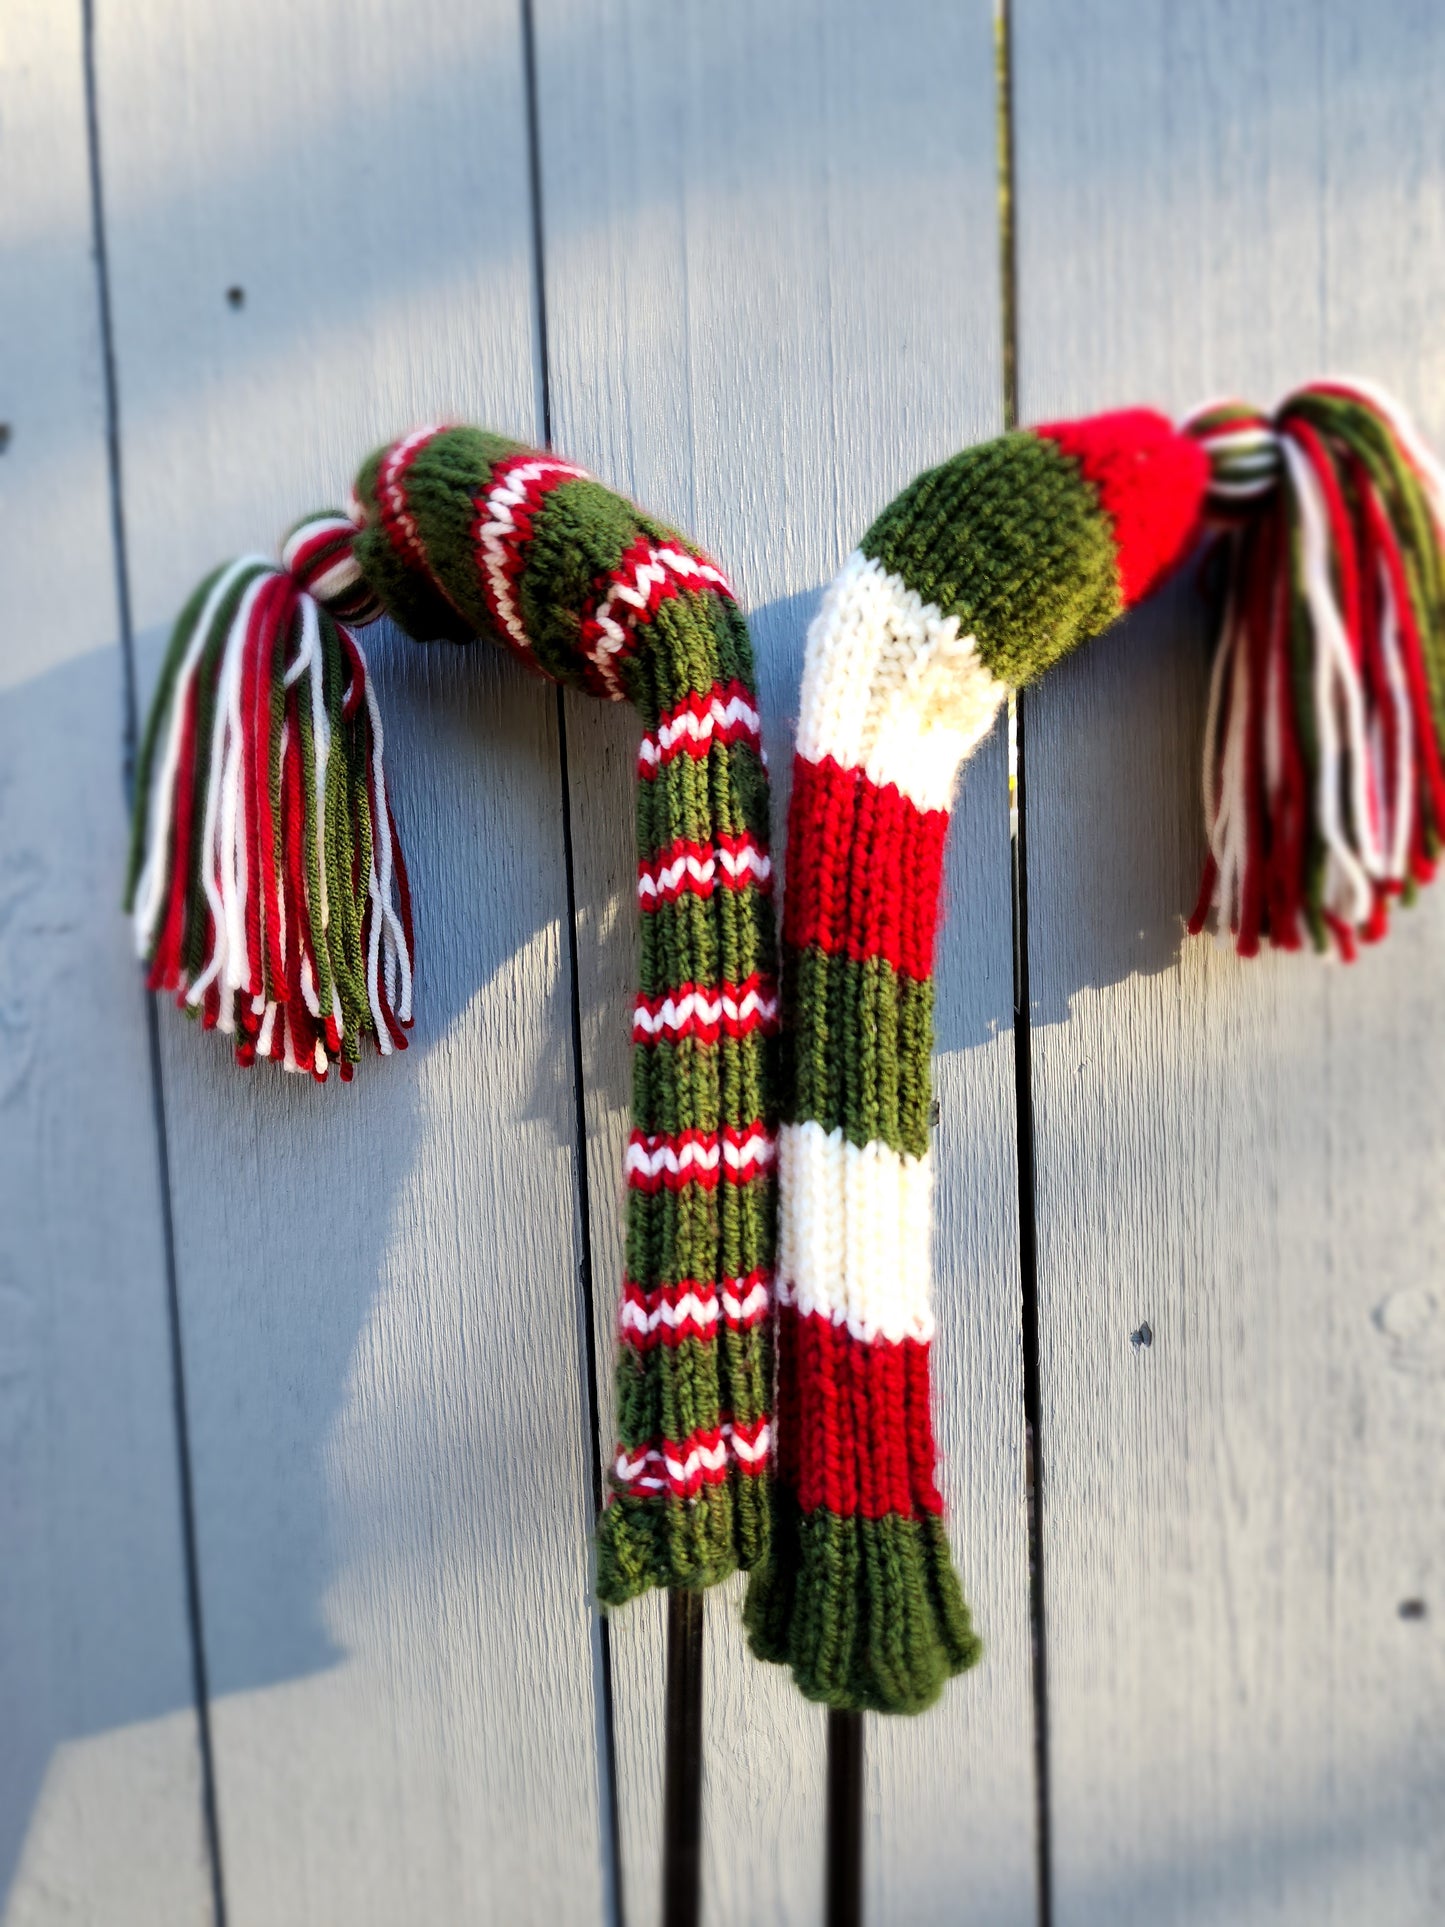 Two Hand Knit Golf Club Head Covers Retro-Vintage Green, Red & Off White with Tassels for Fairway Woods - Austinknittylimits